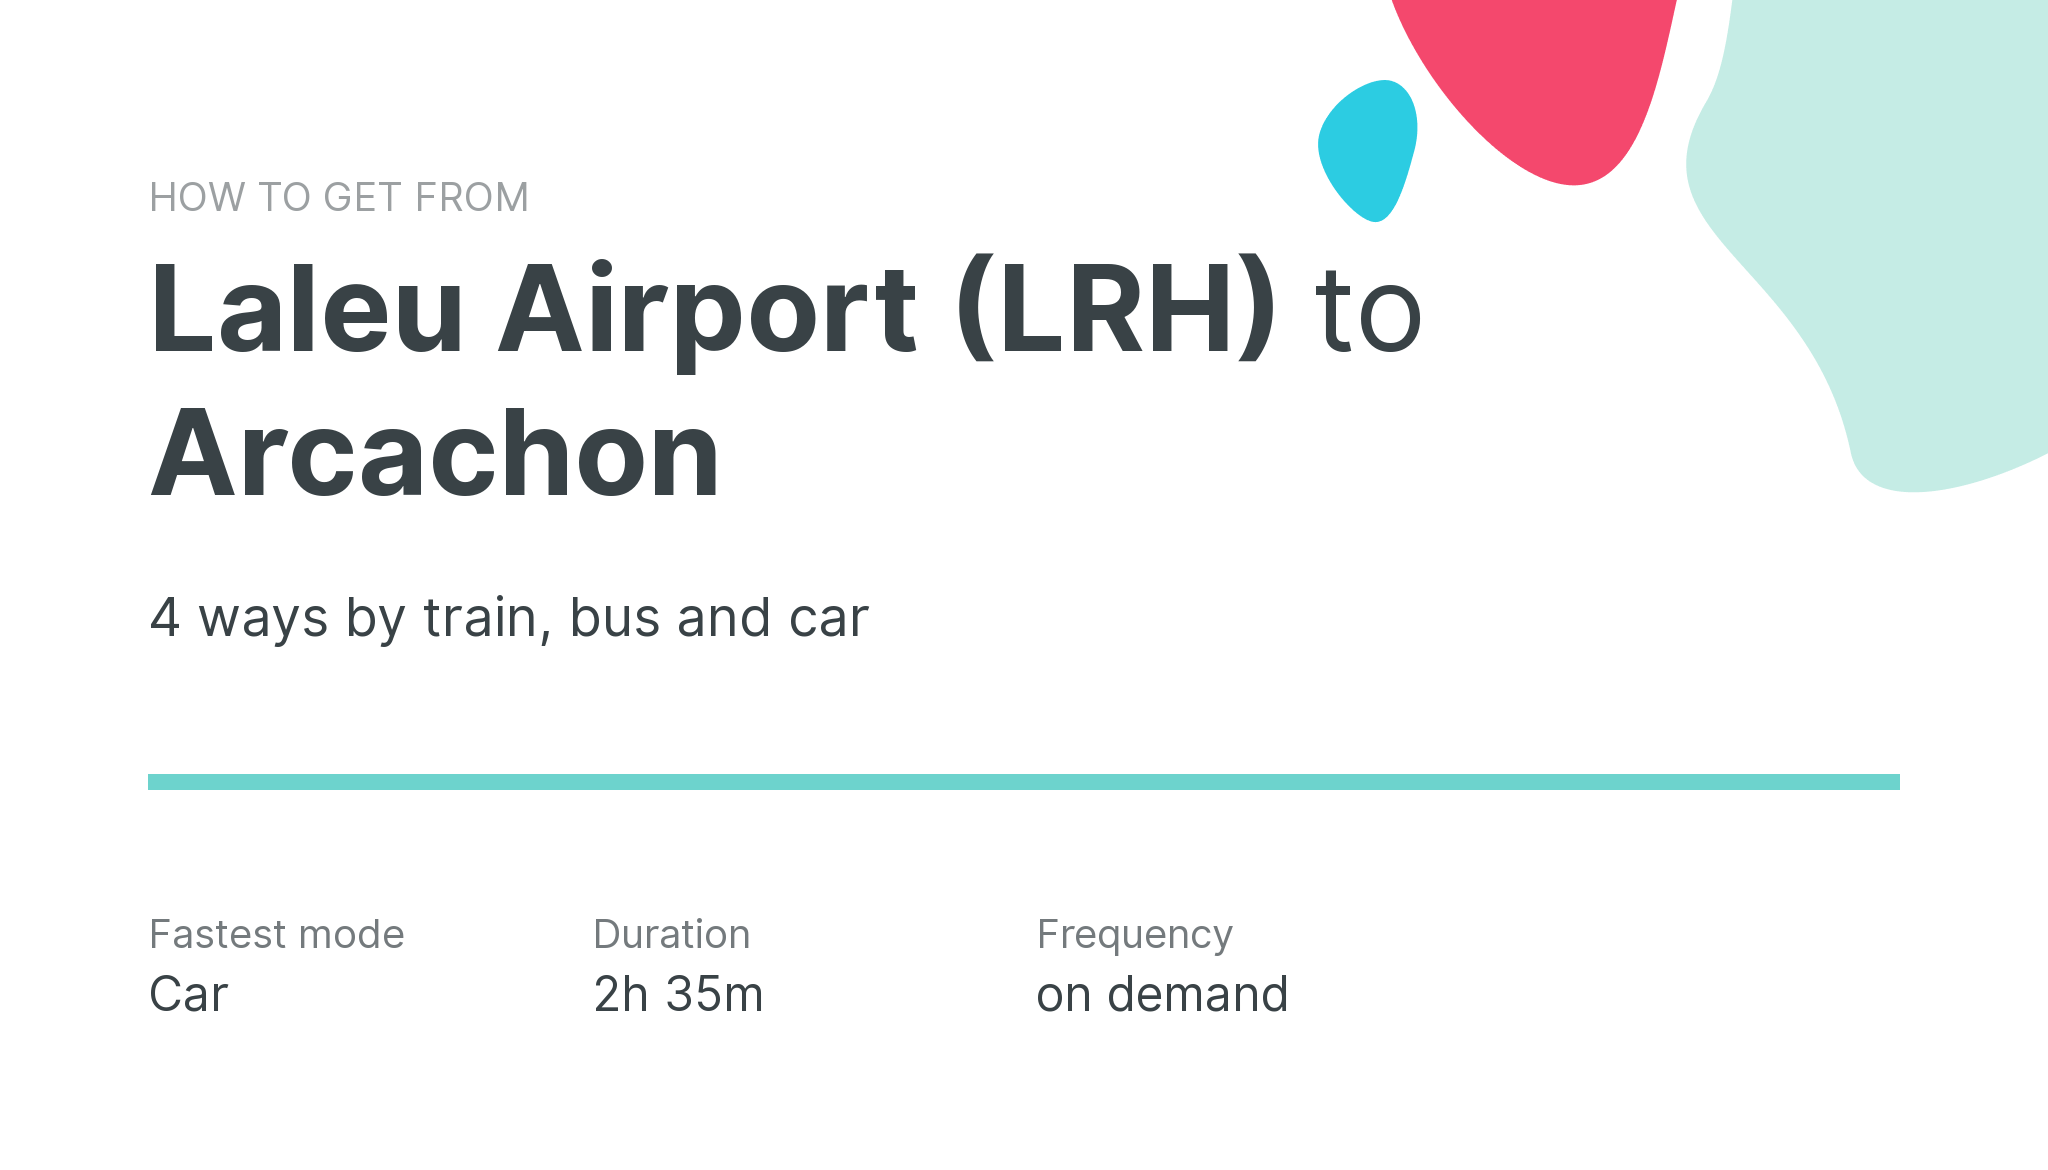 How do I get from Laleu Airport (LRH) to Arcachon